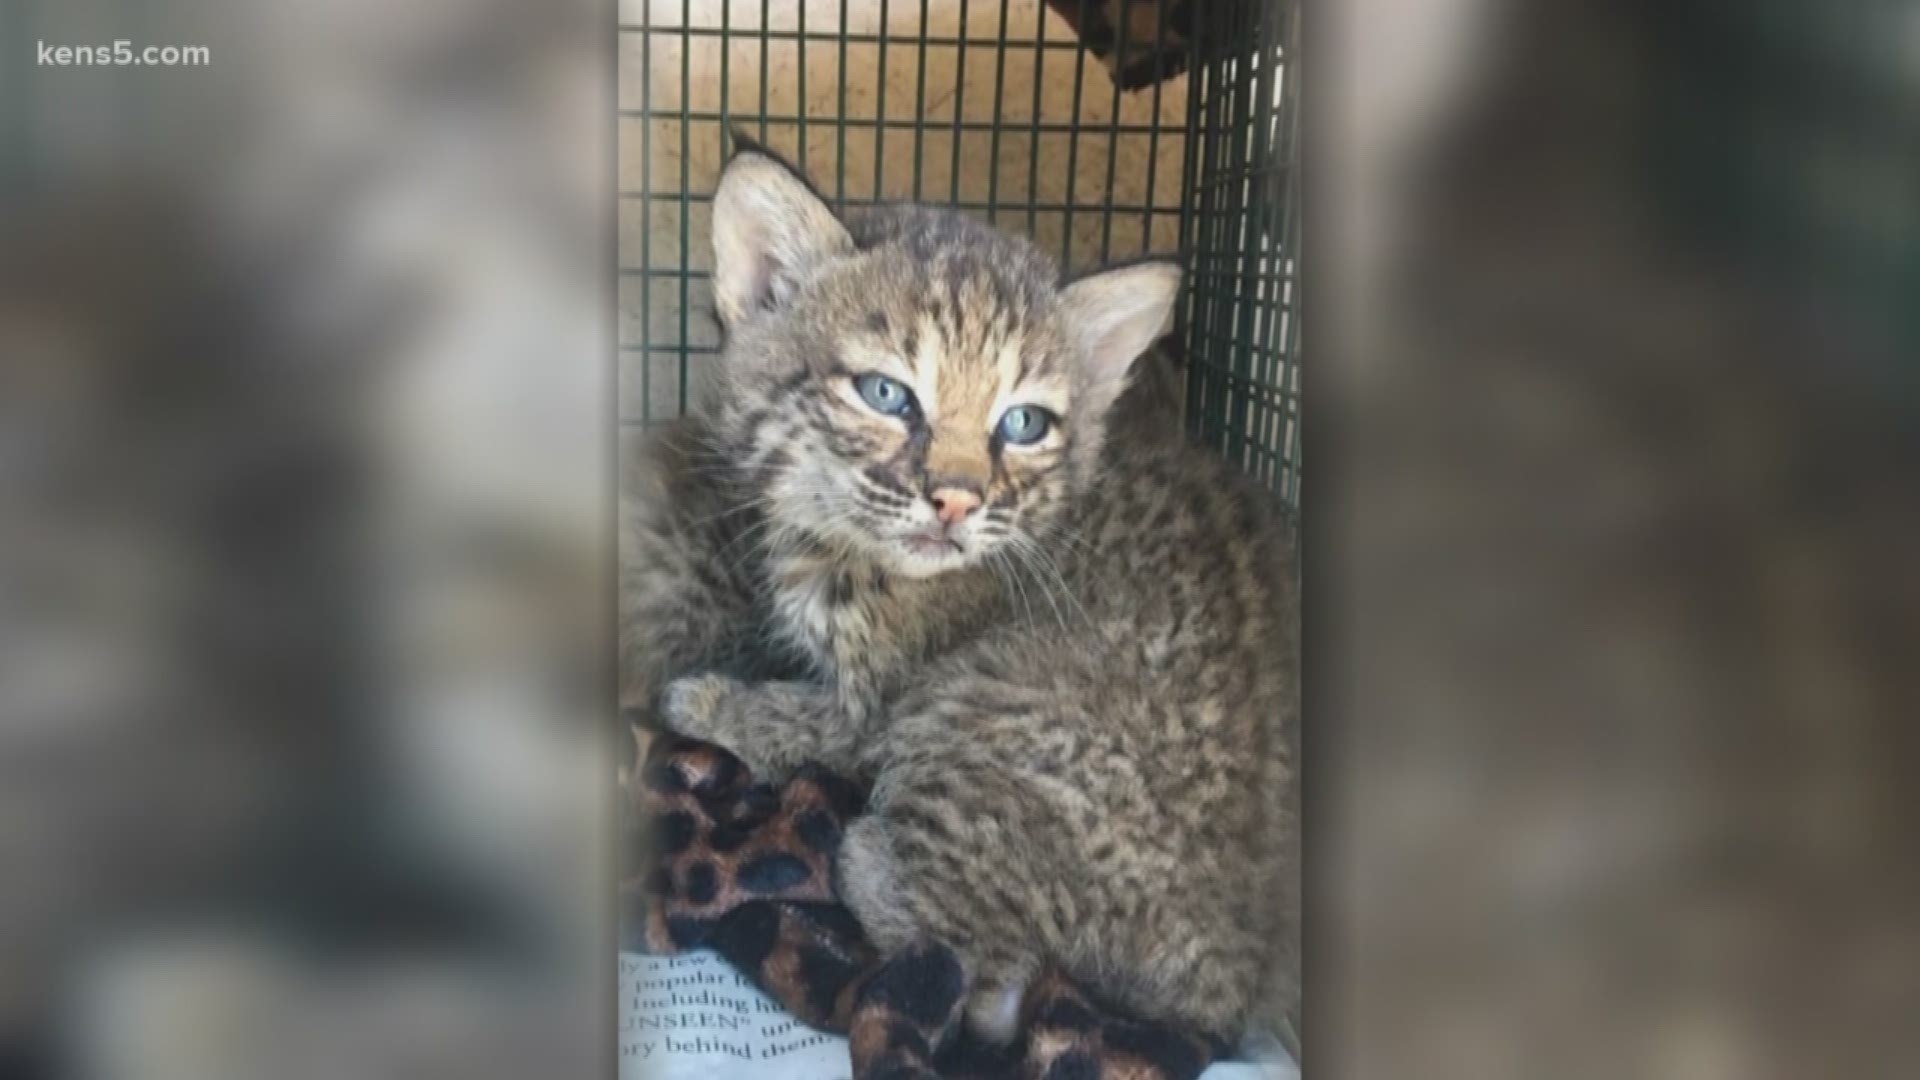 A San Antonio family with good intentions to save and feed homeless kittens learned the hard way about the difference between harmless housecats and wild bobcats. Eyewitness News reporter Sharon Ko joins us now.